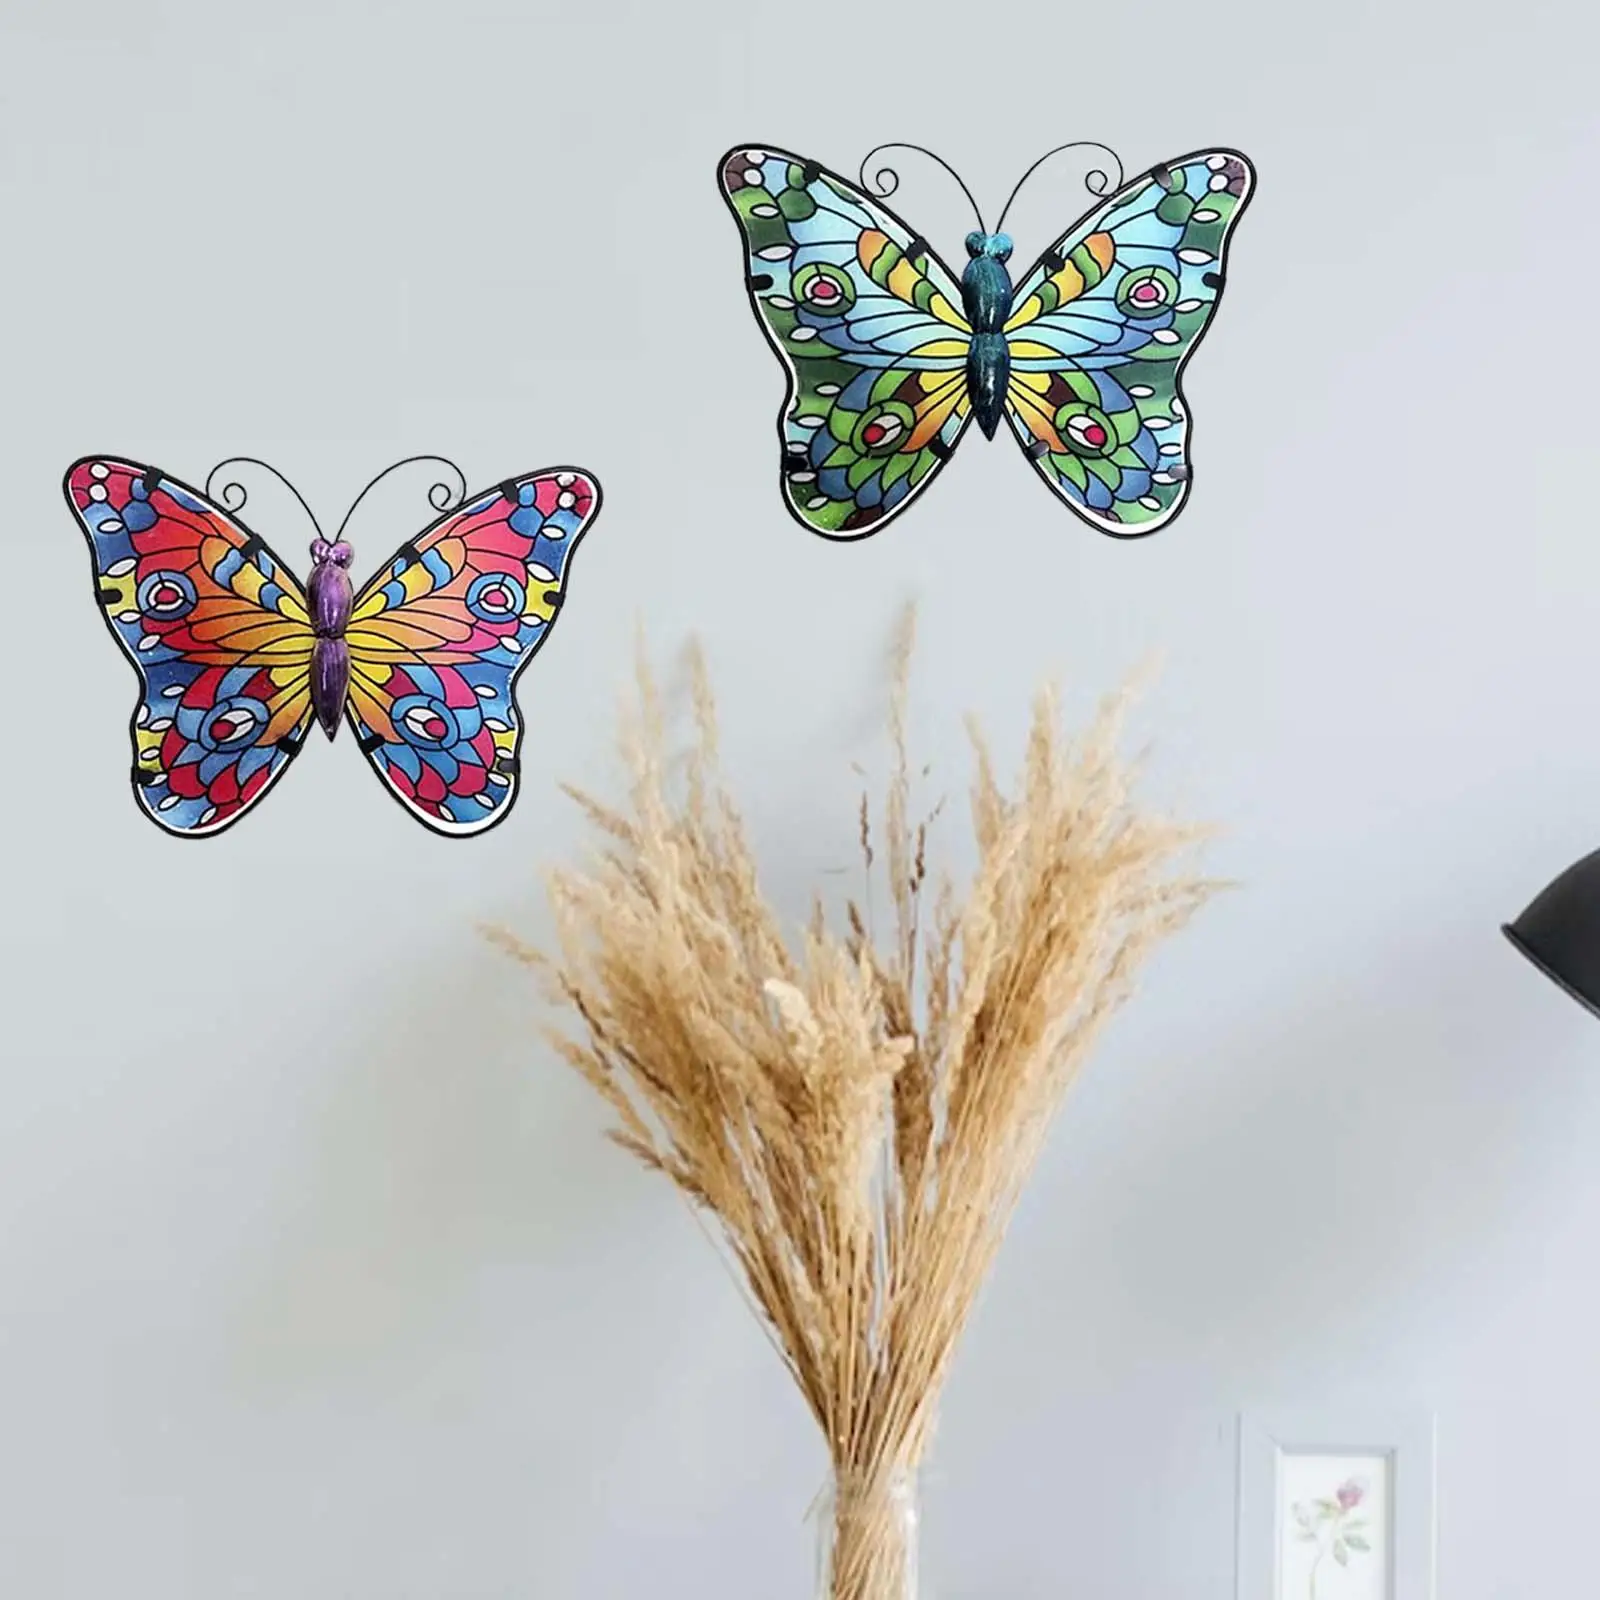 2x 3D Butterfly Ornaments Figurine Hanging Ornament Plaque Wall Decor Metal for Patio Outdoor Decor Office Backyard